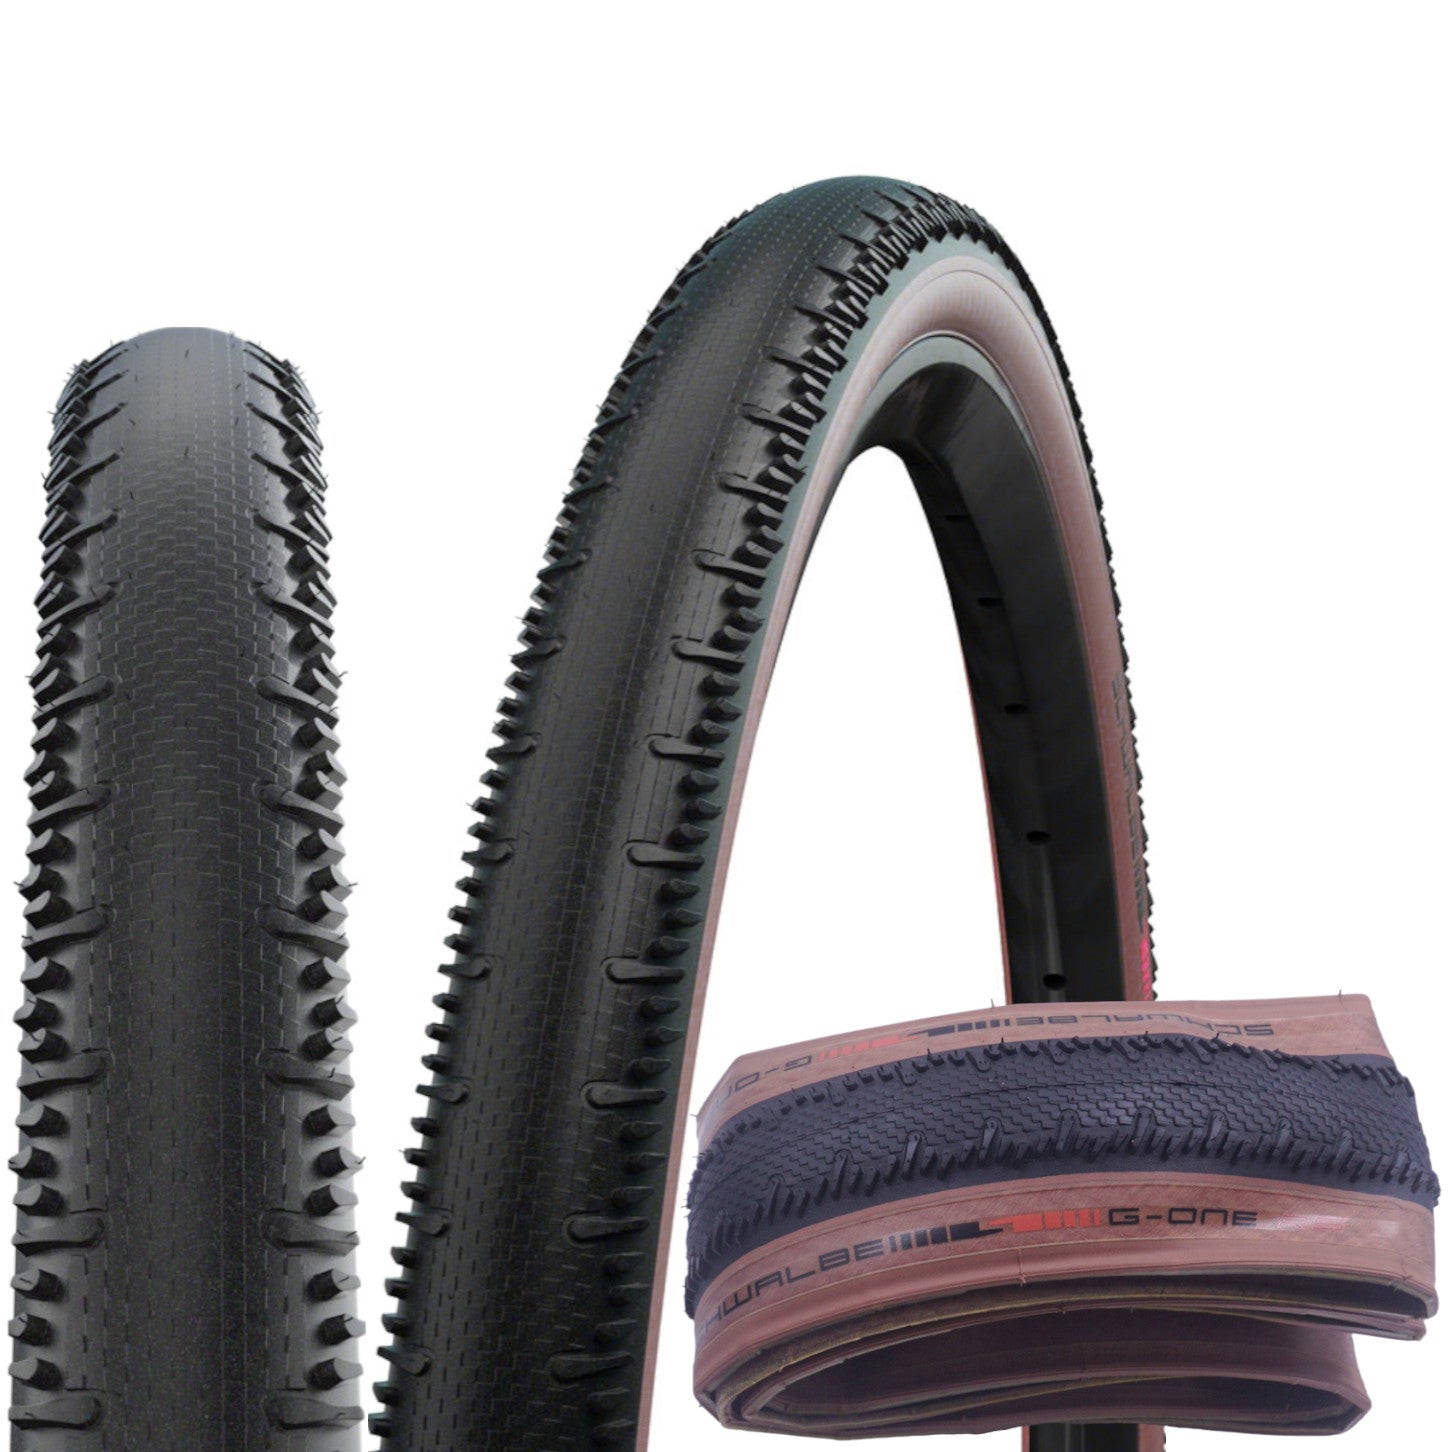 Schwalbe G-One RS 700c Brownwall Tubeless S-Race Folding Gravel Tire - The Bikesmiths